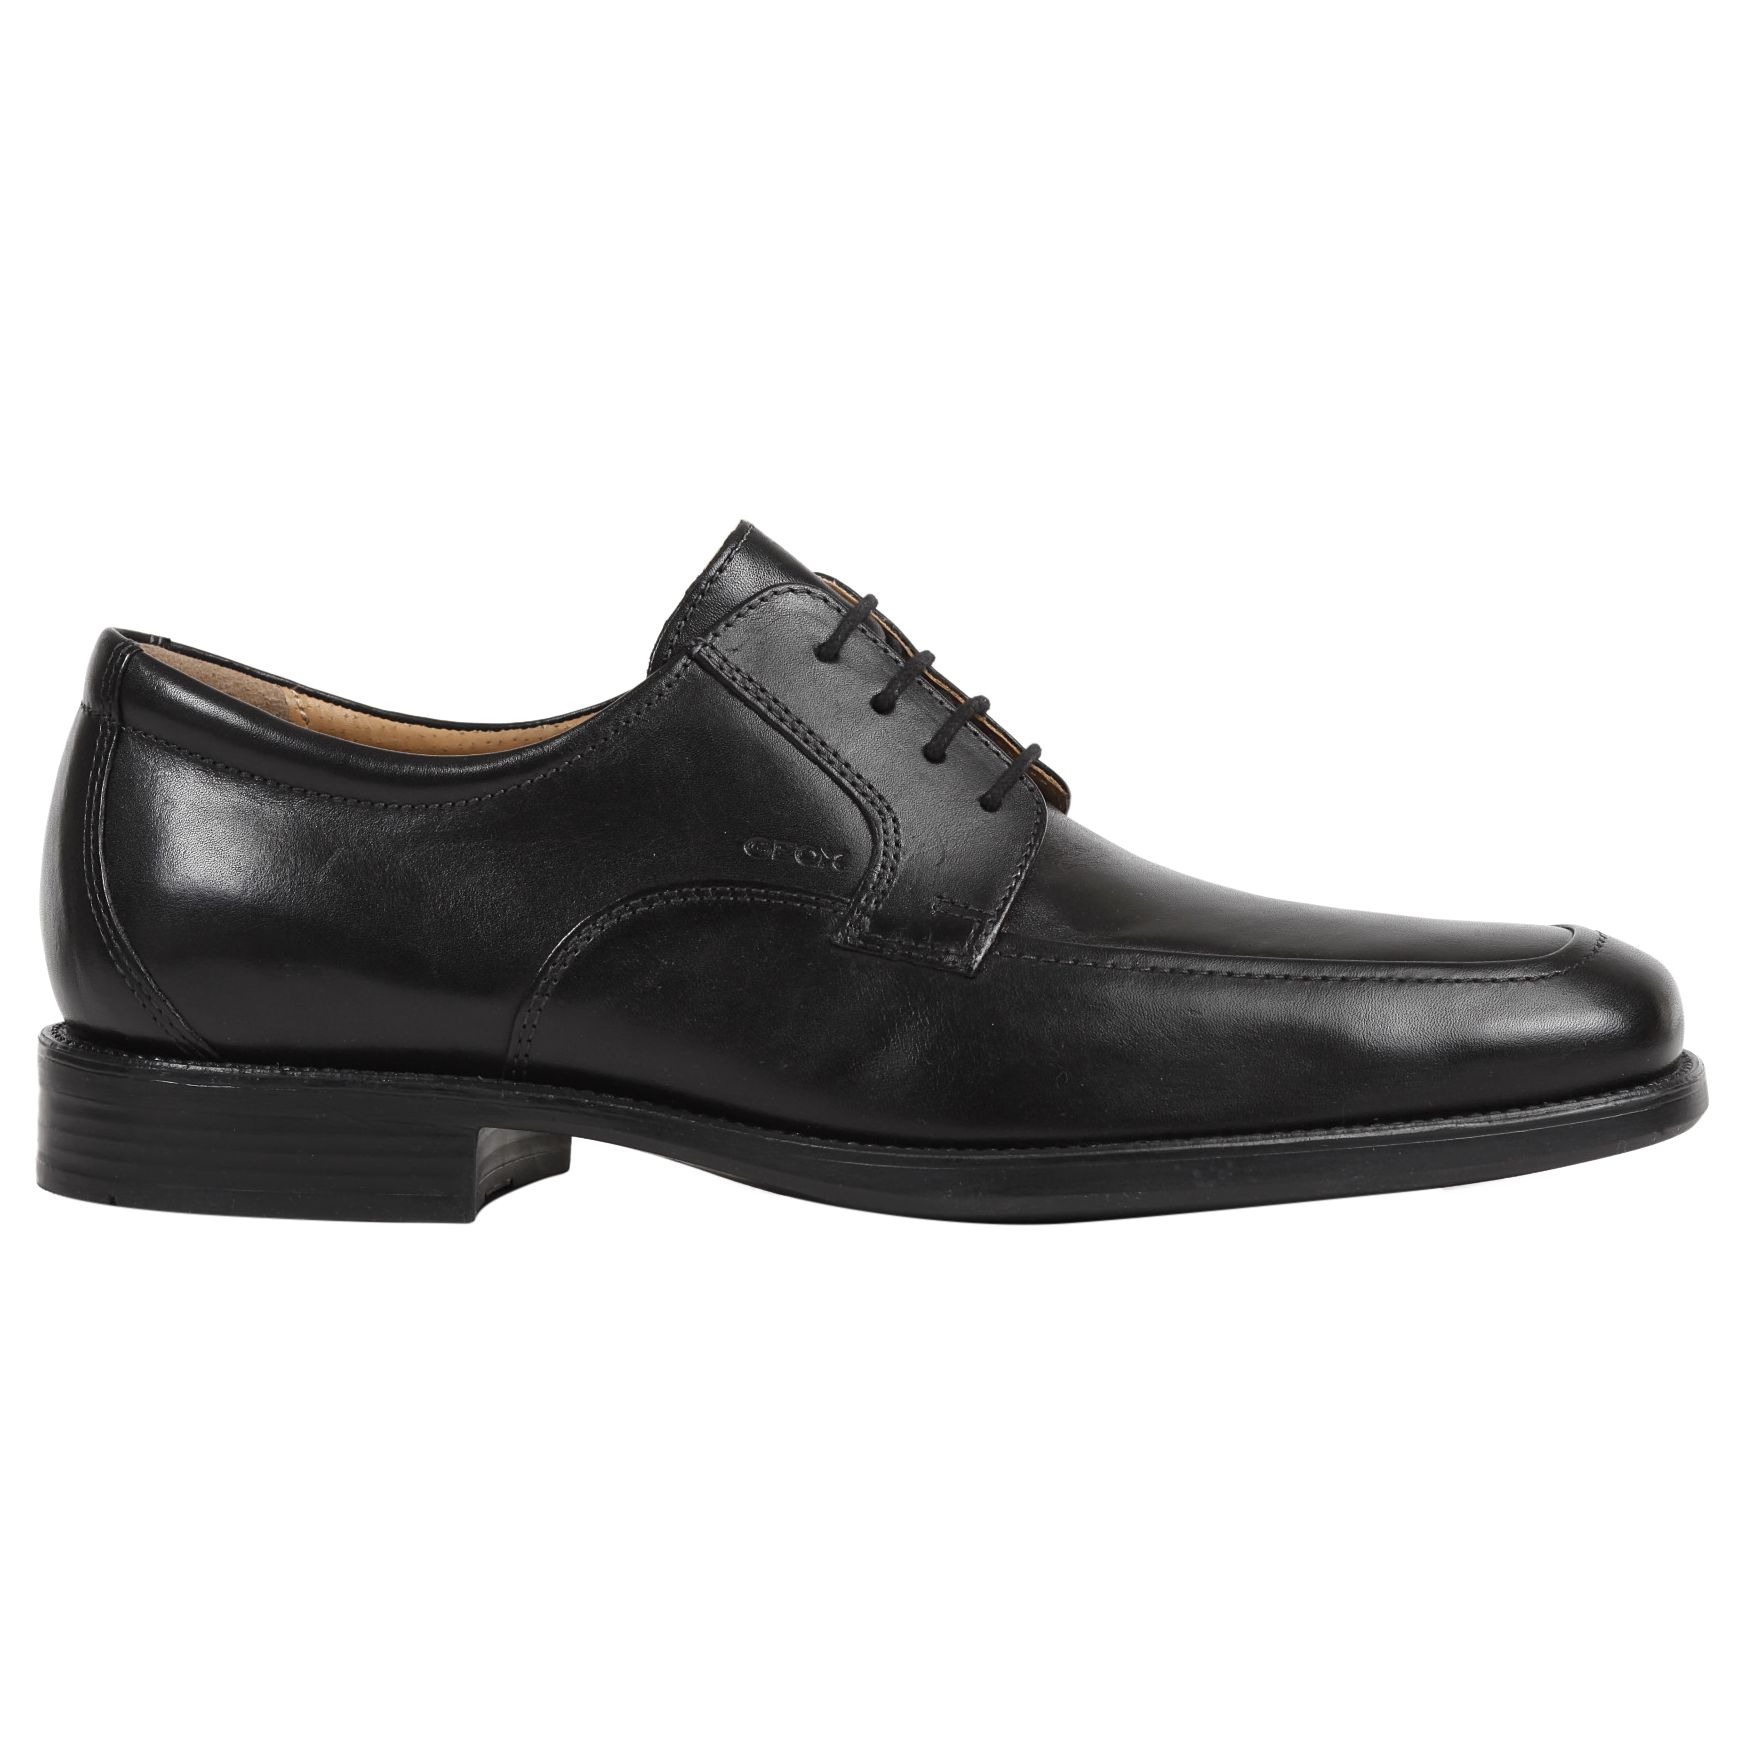 Geox Federico Apron Toe Derby Shoes, Black at John Lewis & Partners